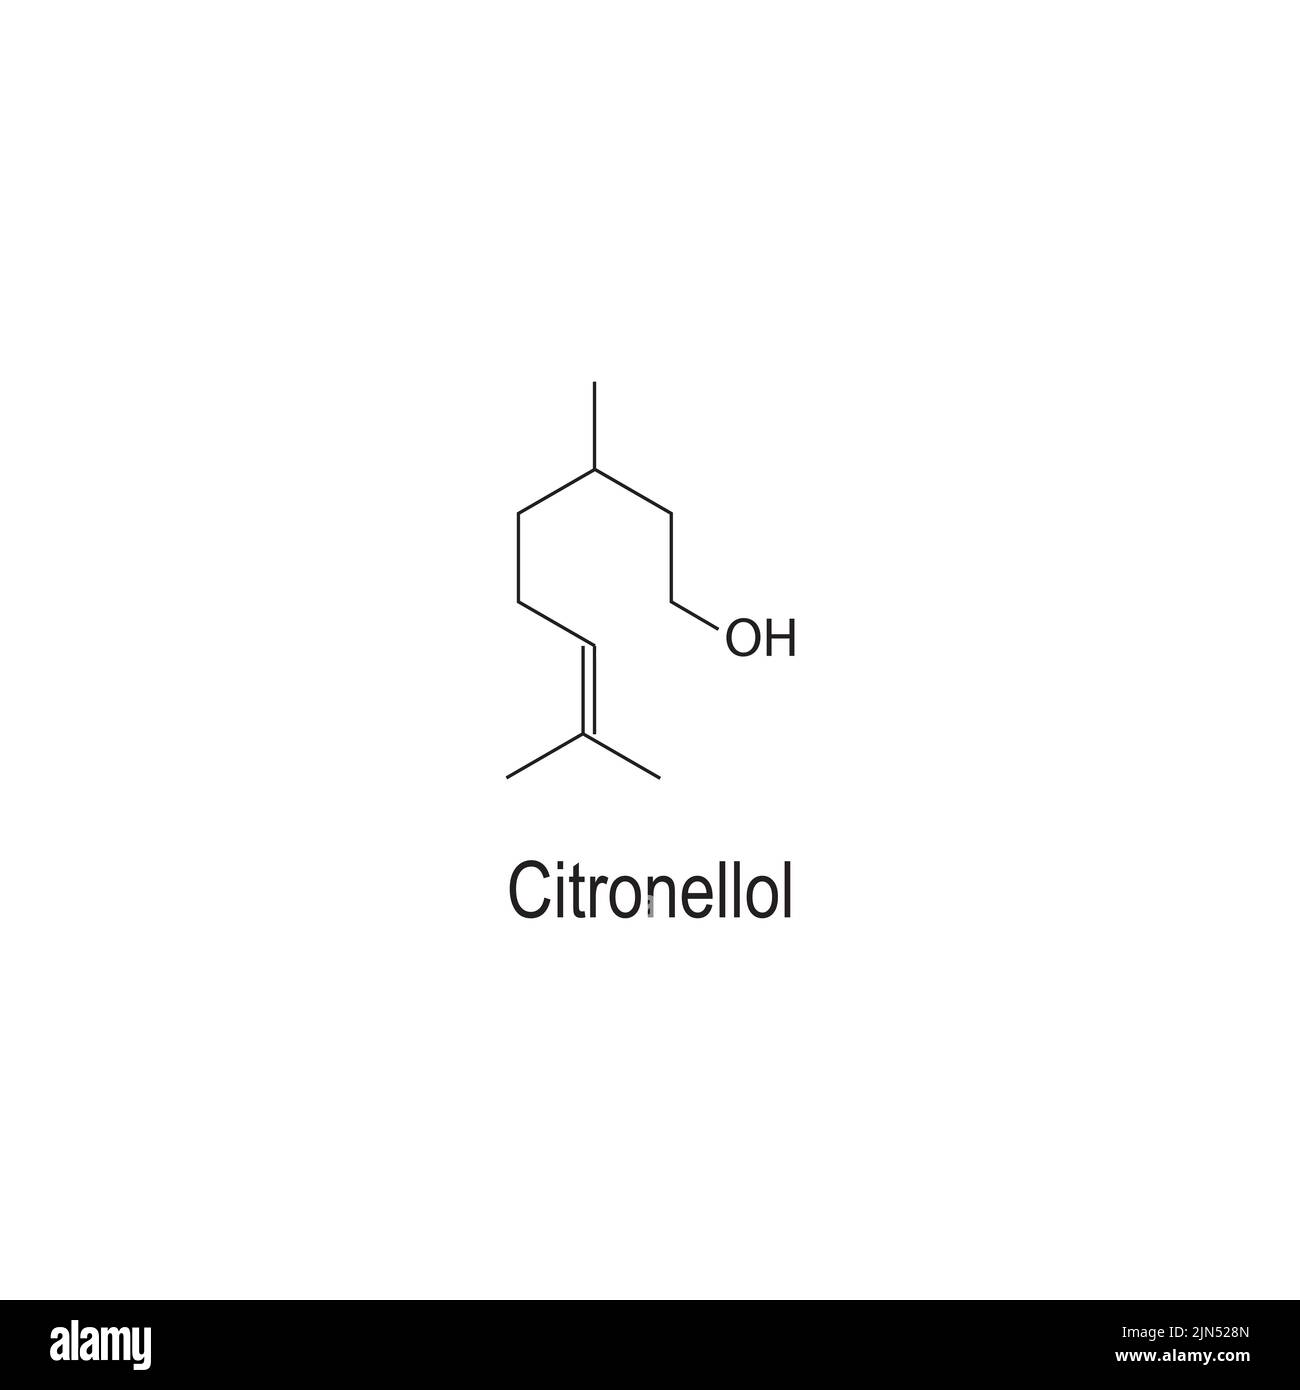 Citronellol (alkene) chemical structure on white background - component of rose and geranium oils. Stock Vector